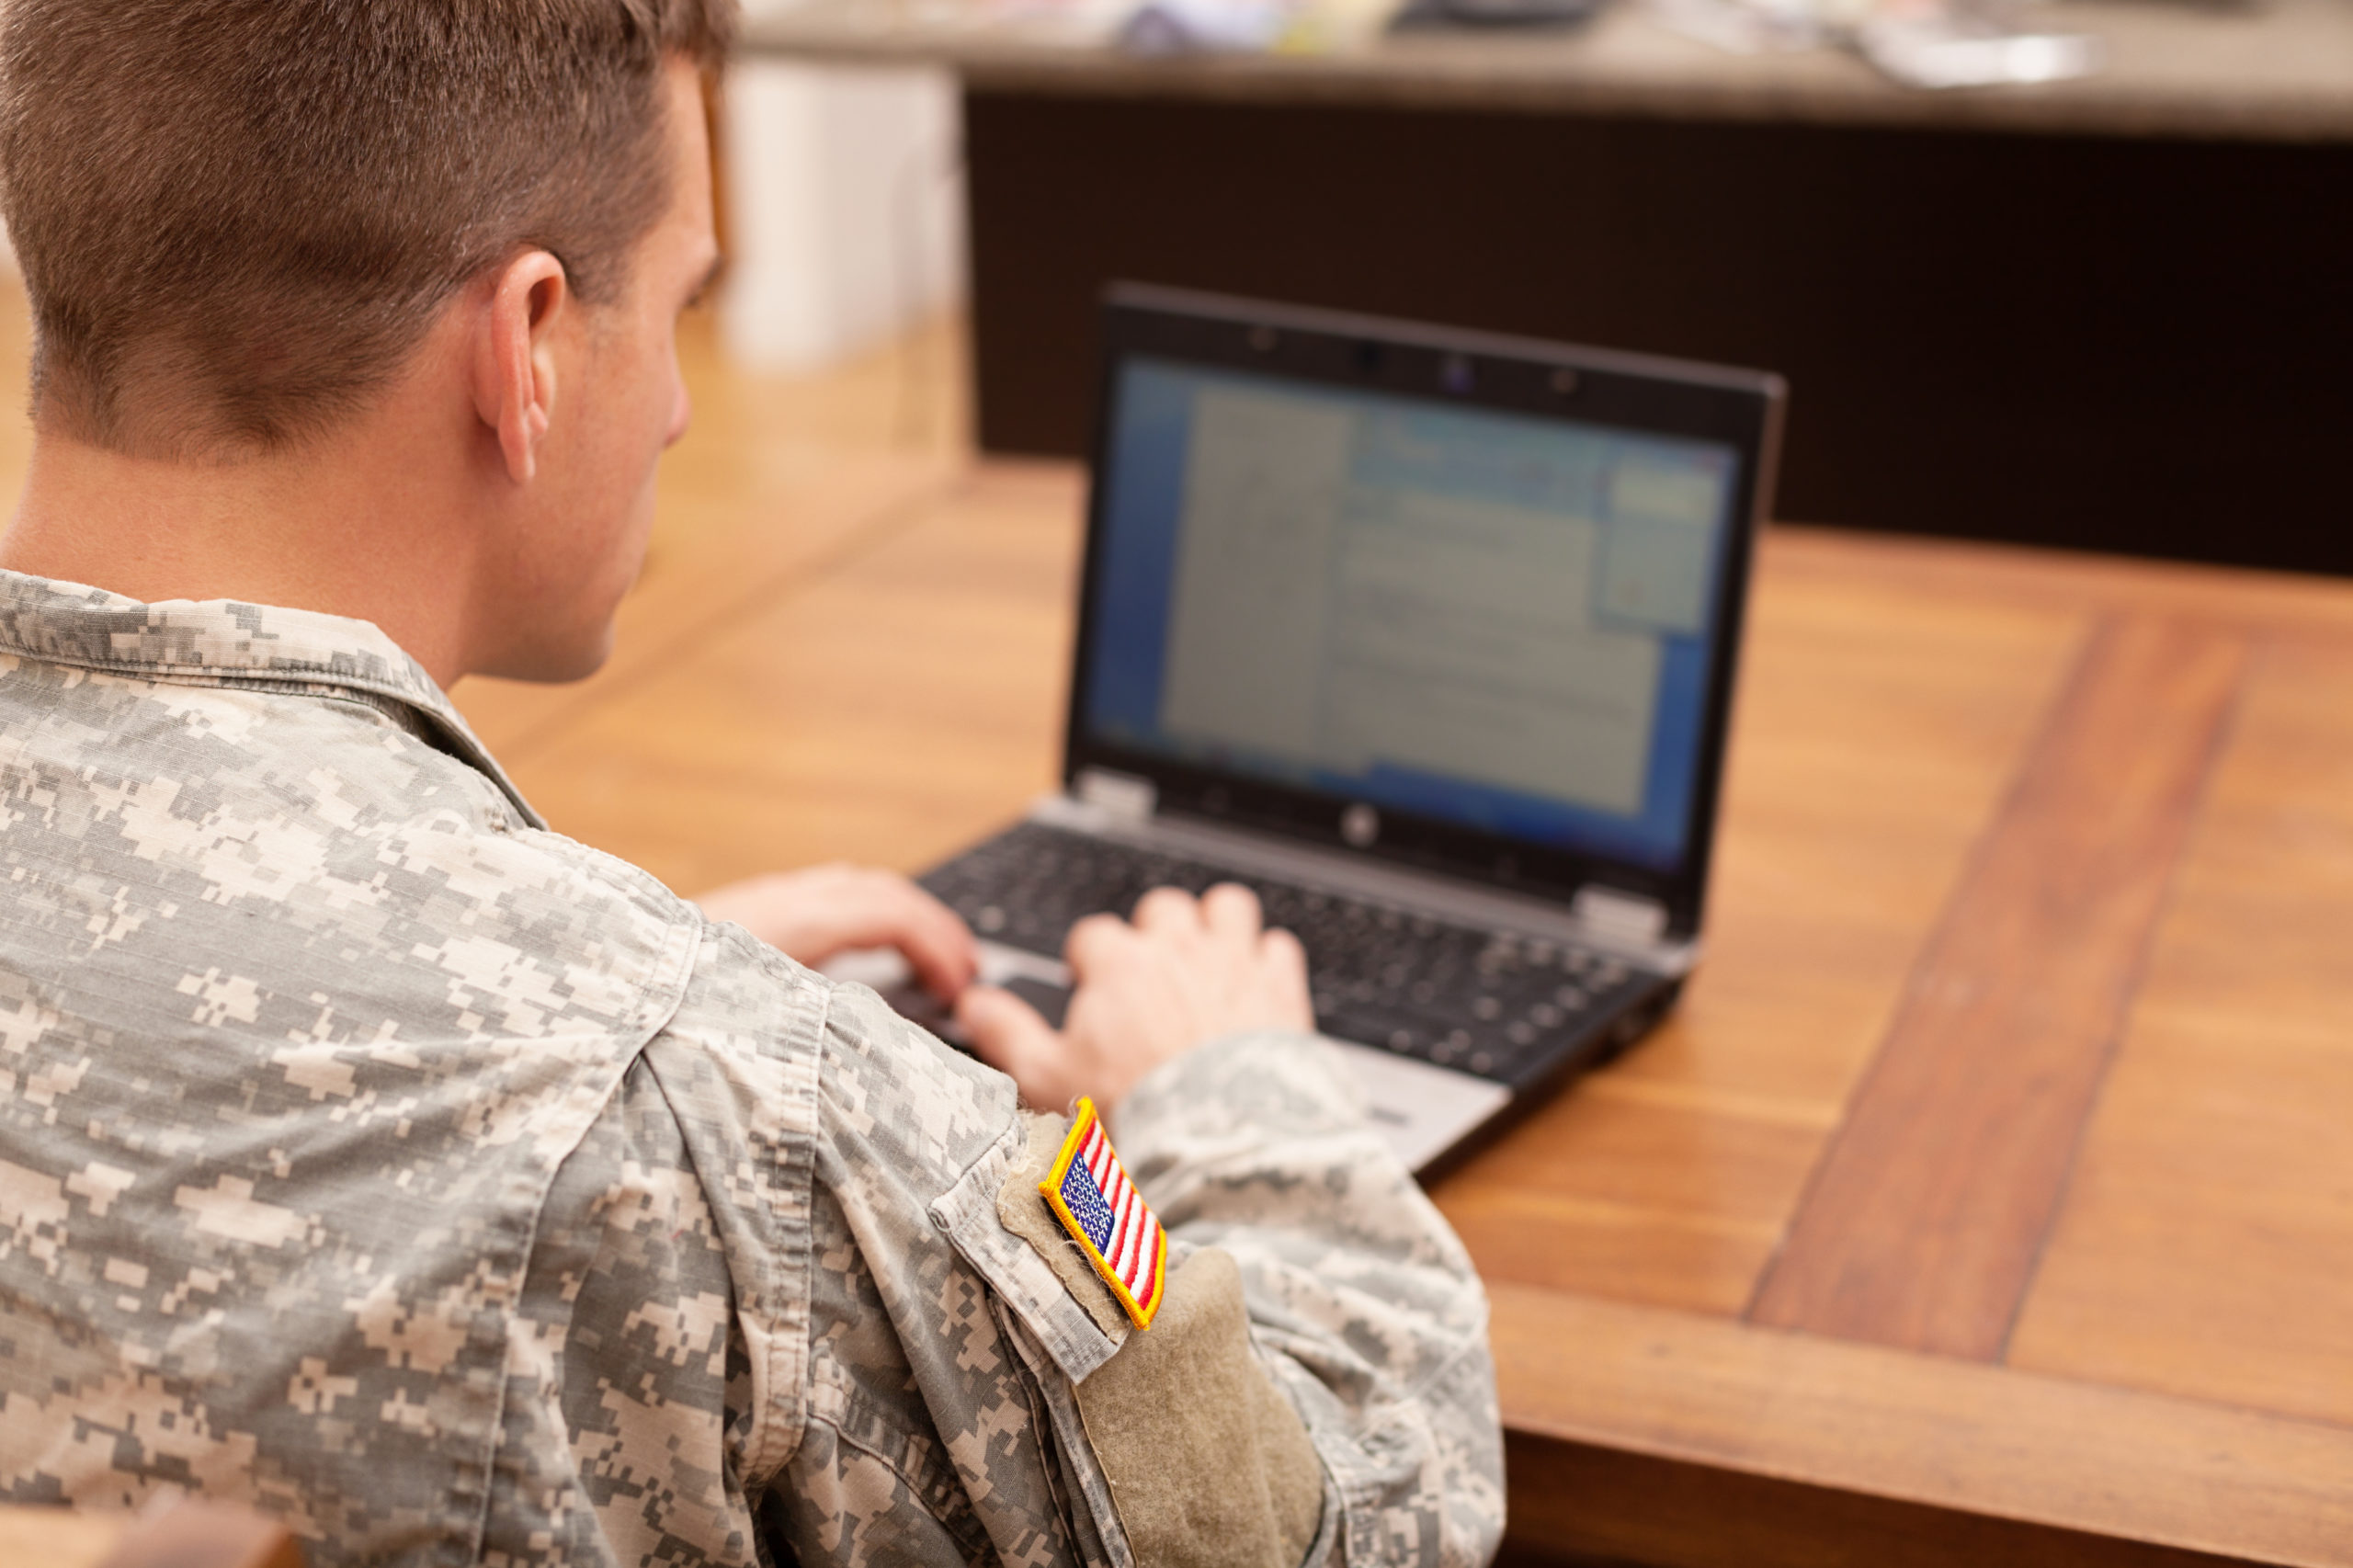 Miller Mendel’s eSOPH system credited with removing challenges for military applicants.